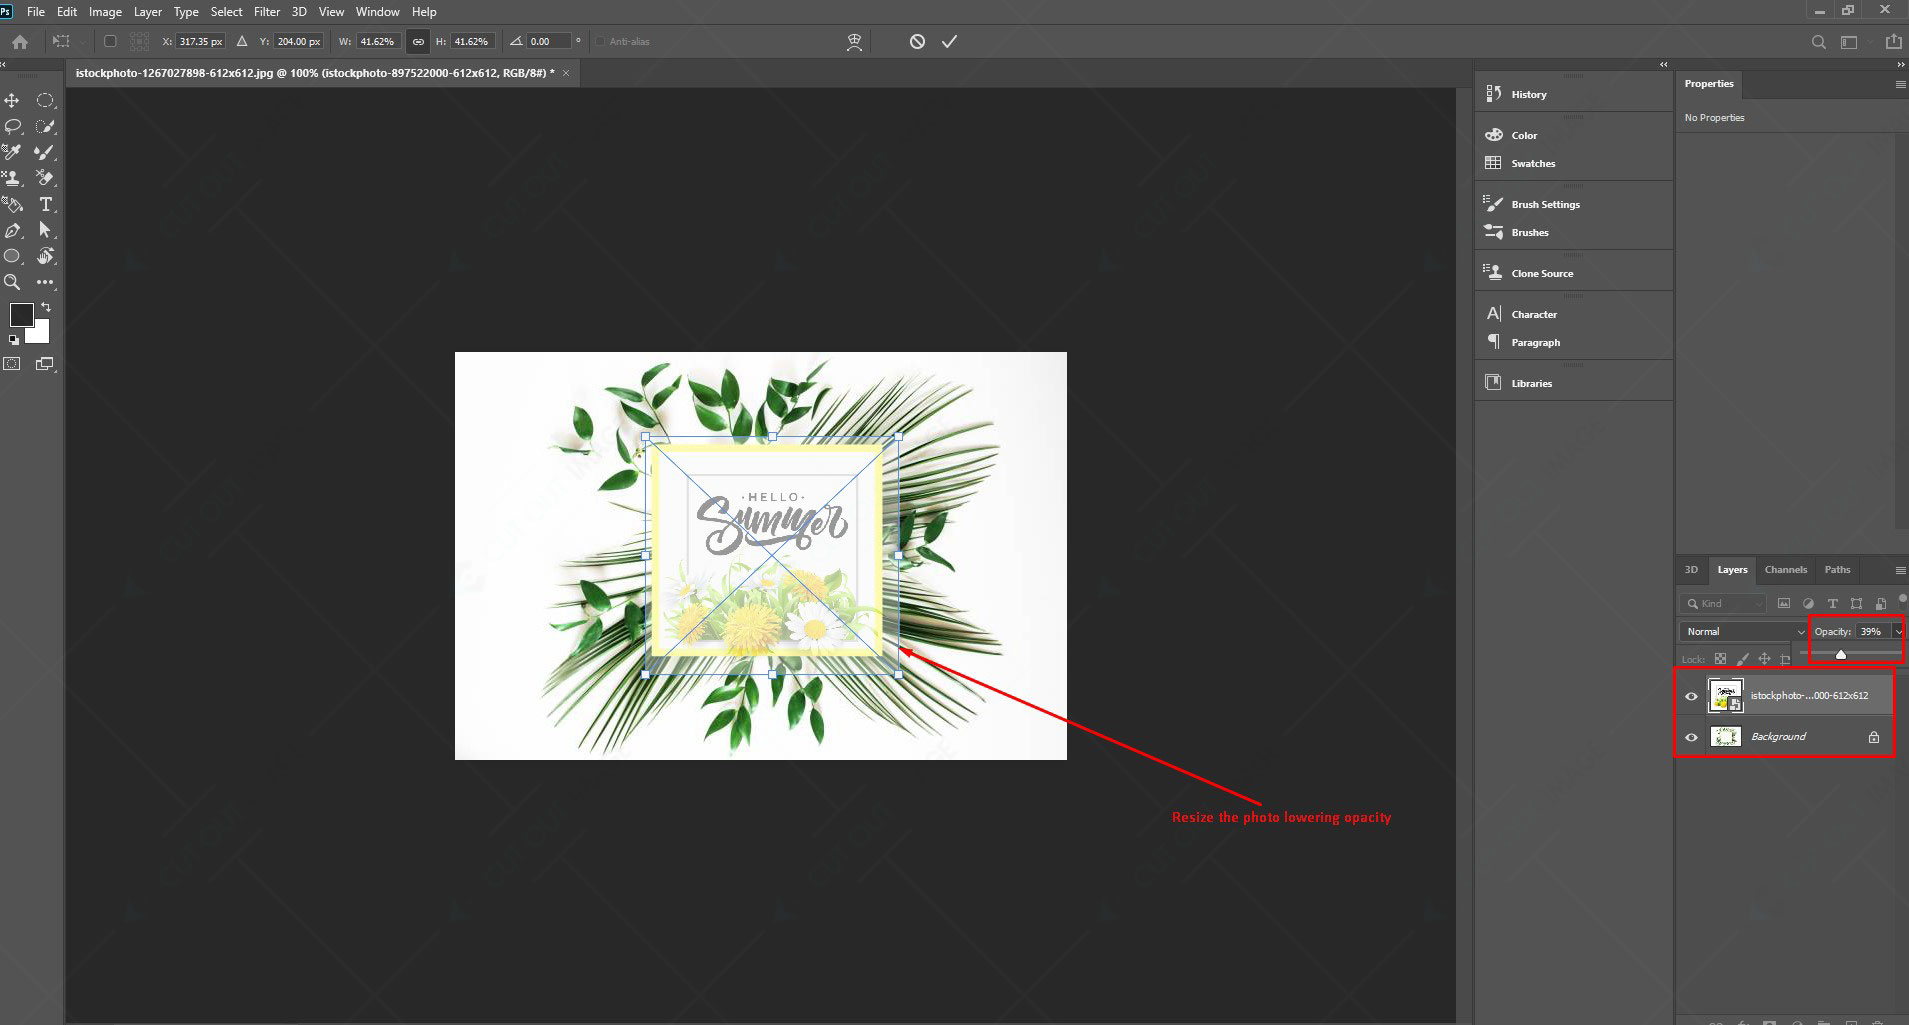 How To Wrap an Image in Photoshop